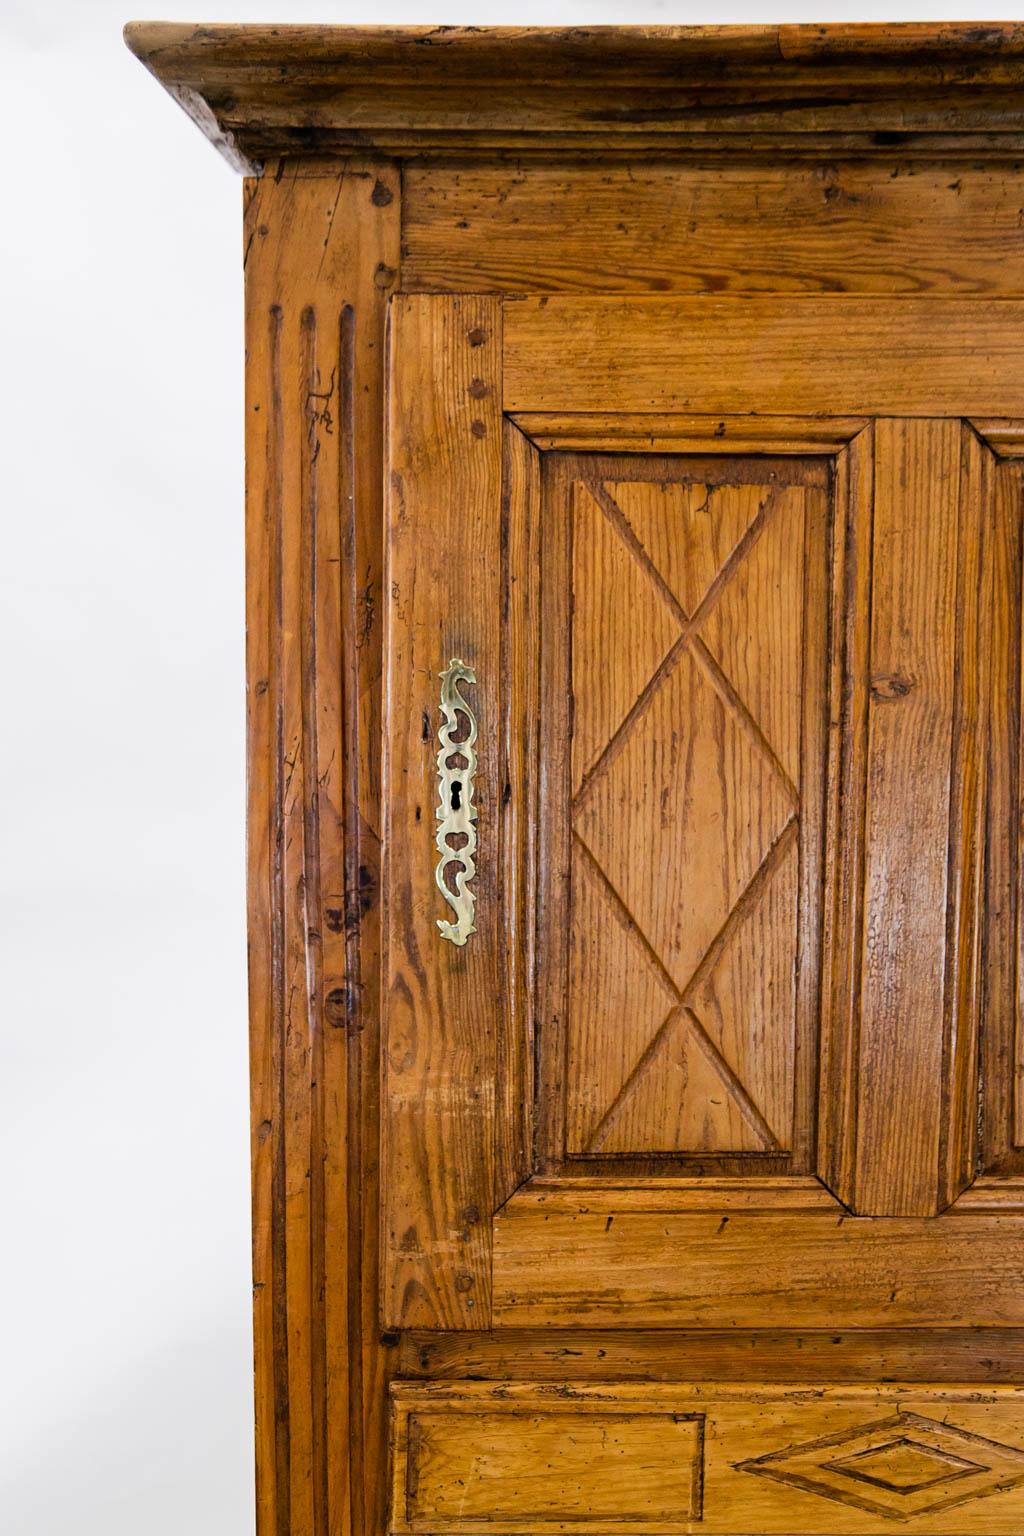 The upper and lower doors of this bonnetiere have exposed double peg construction with raised panels having diamond marquee carvings framed by shaped moldings. The stiles are triple fluted from top to bottom. The brass barrel hinges are original.